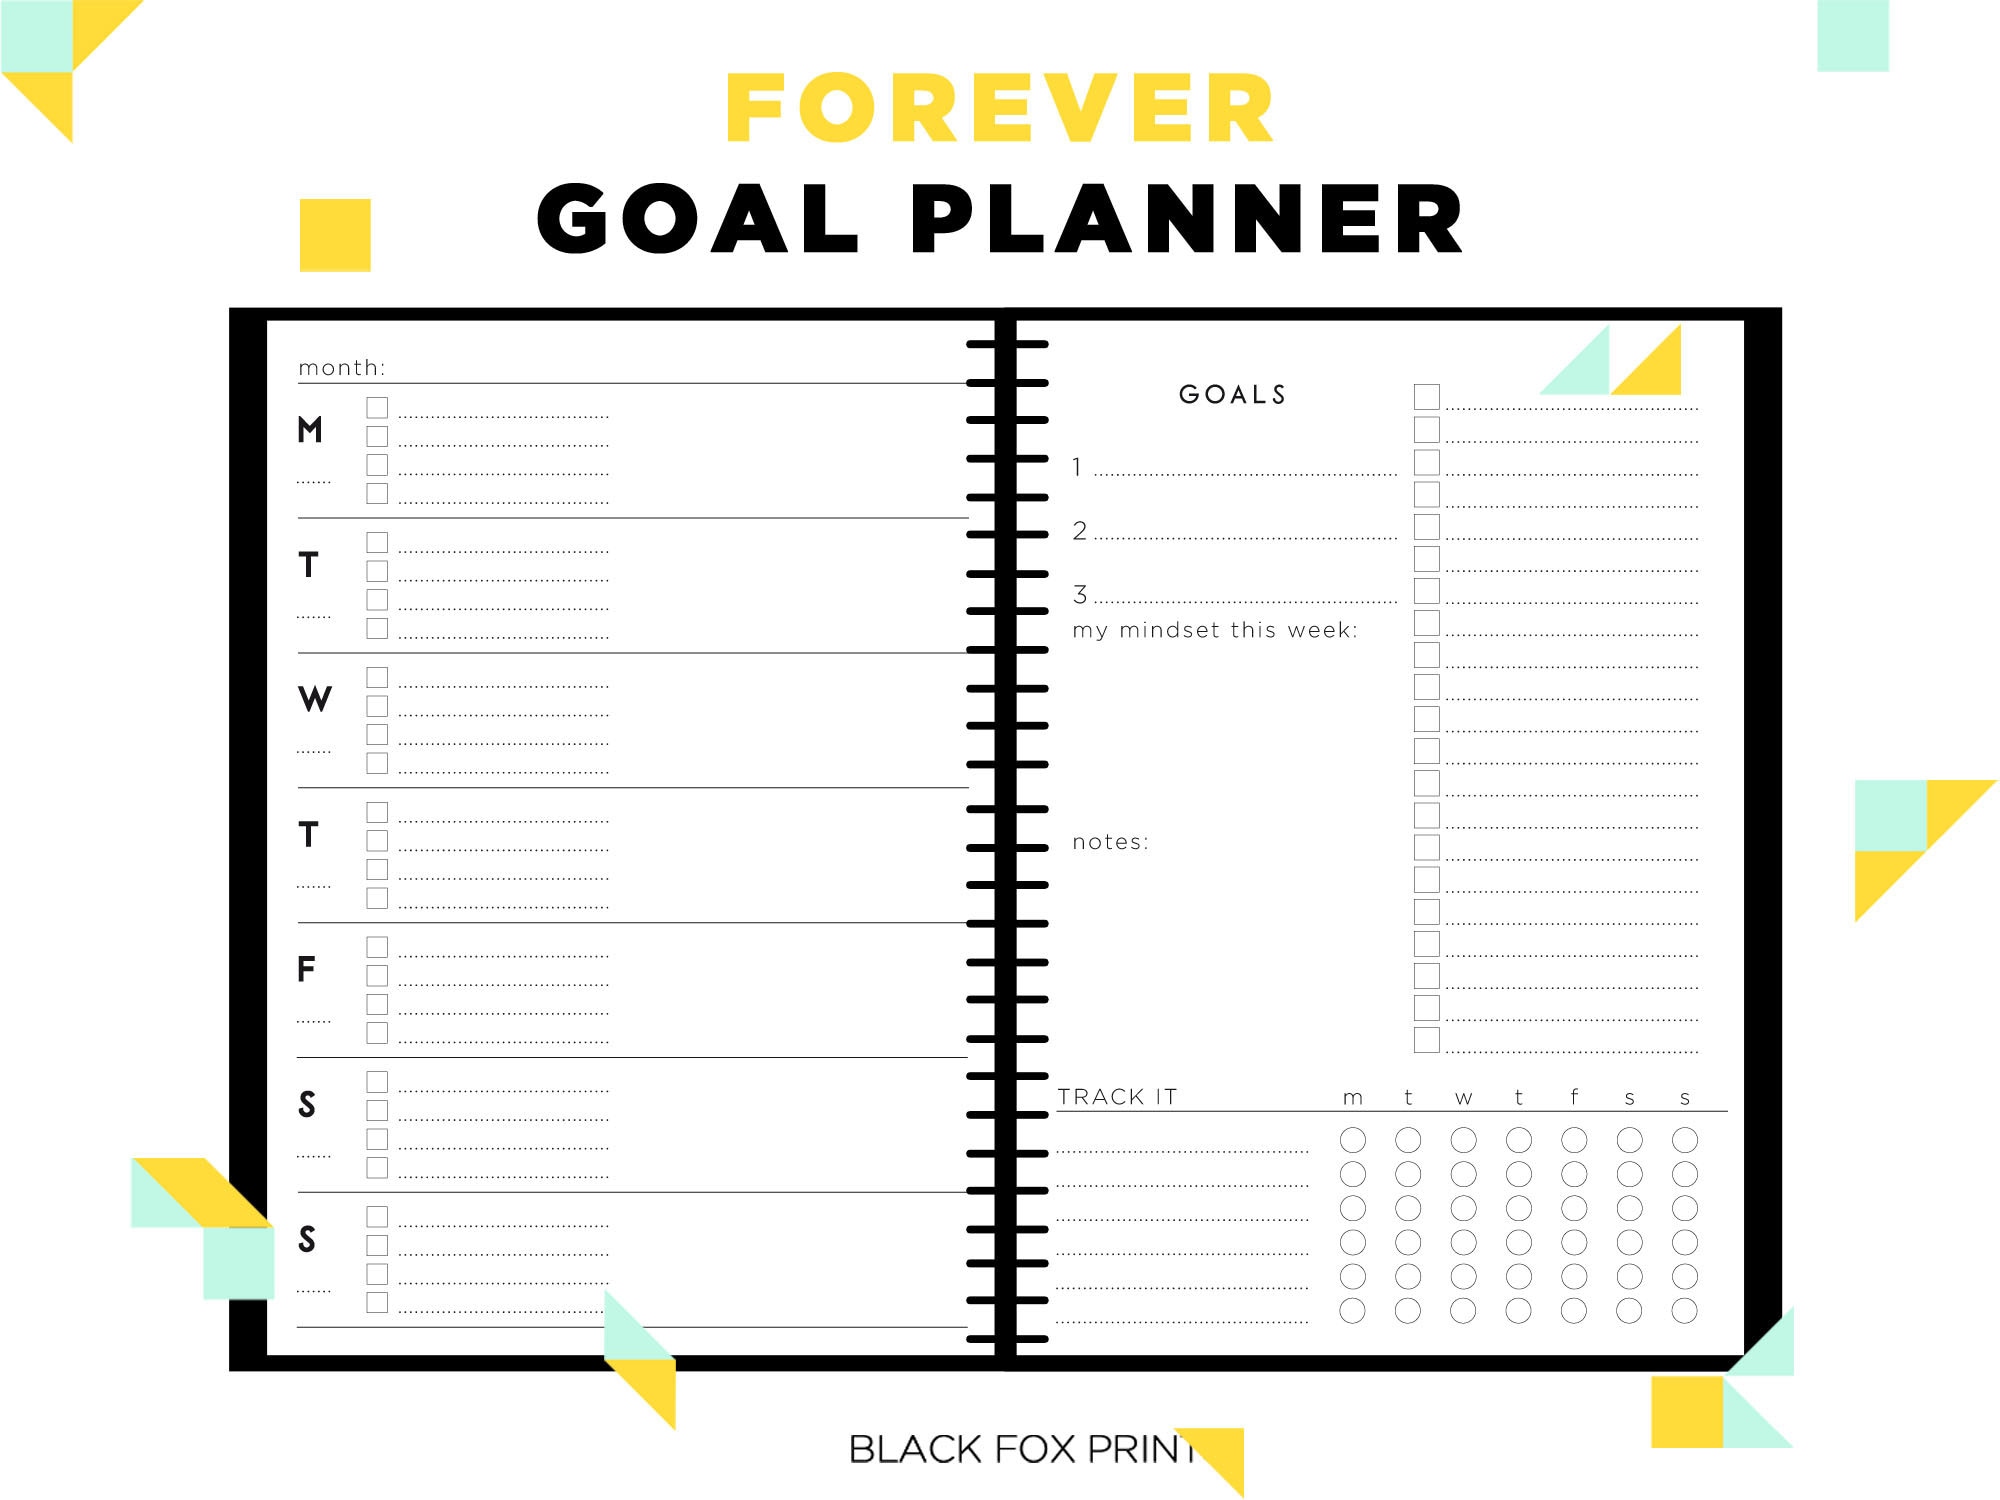 paper-calendars-planners-paper-party-supplies-goal-template-a5